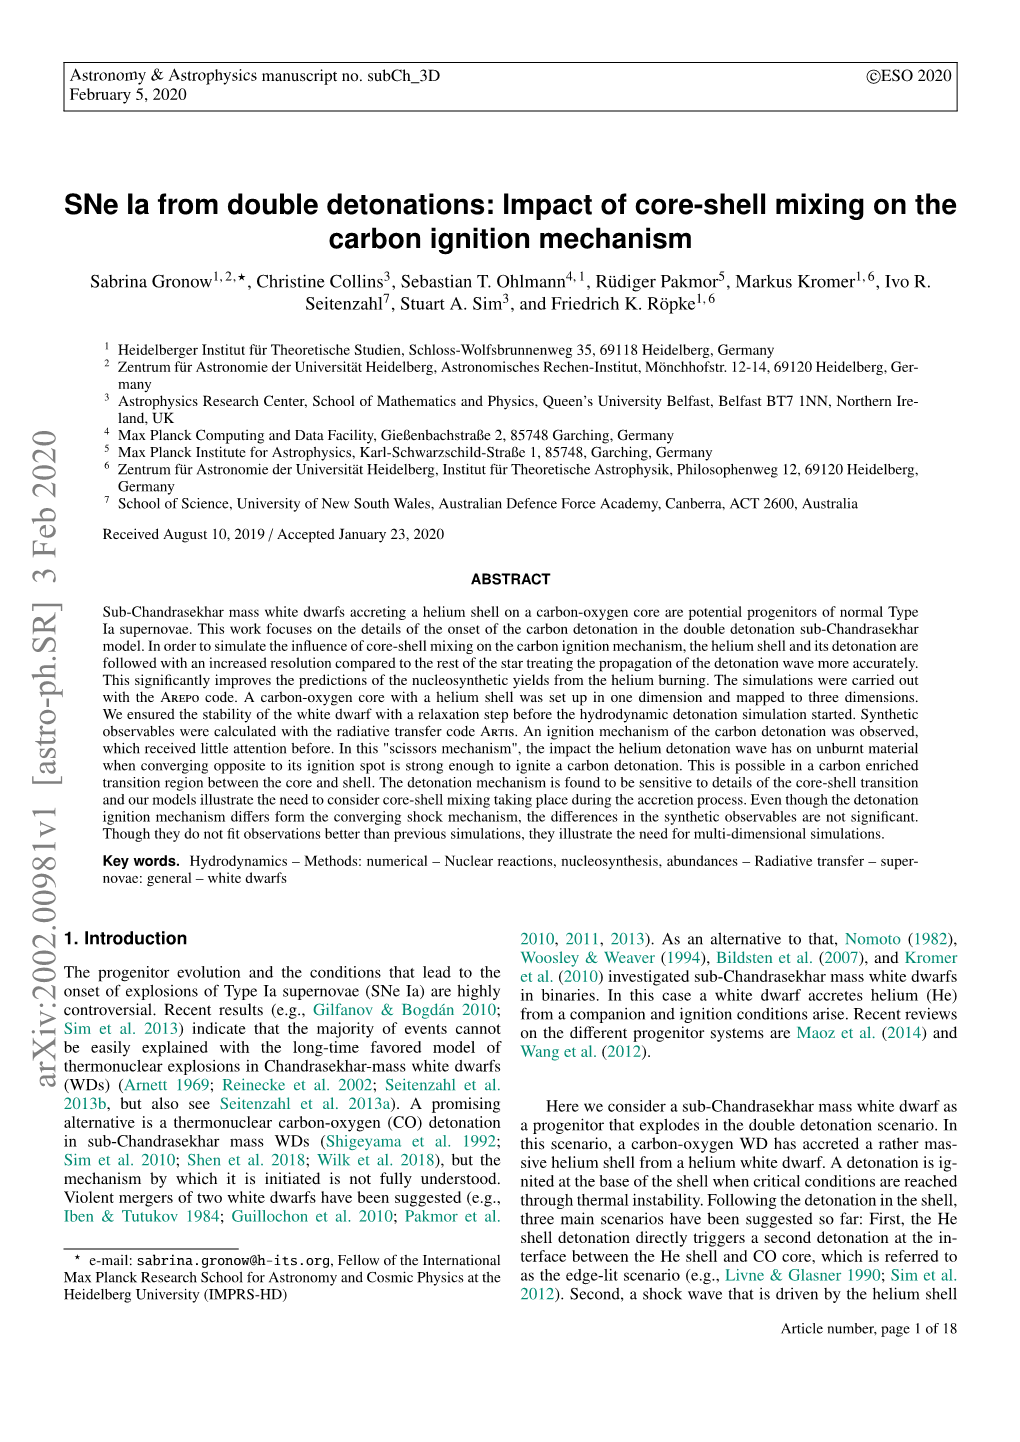 Impact of Core-Shell Mixing on the Carbon Ignition Mechanism Sabrina Gronow1, 2,?, Christine Collins3, Sebastian T